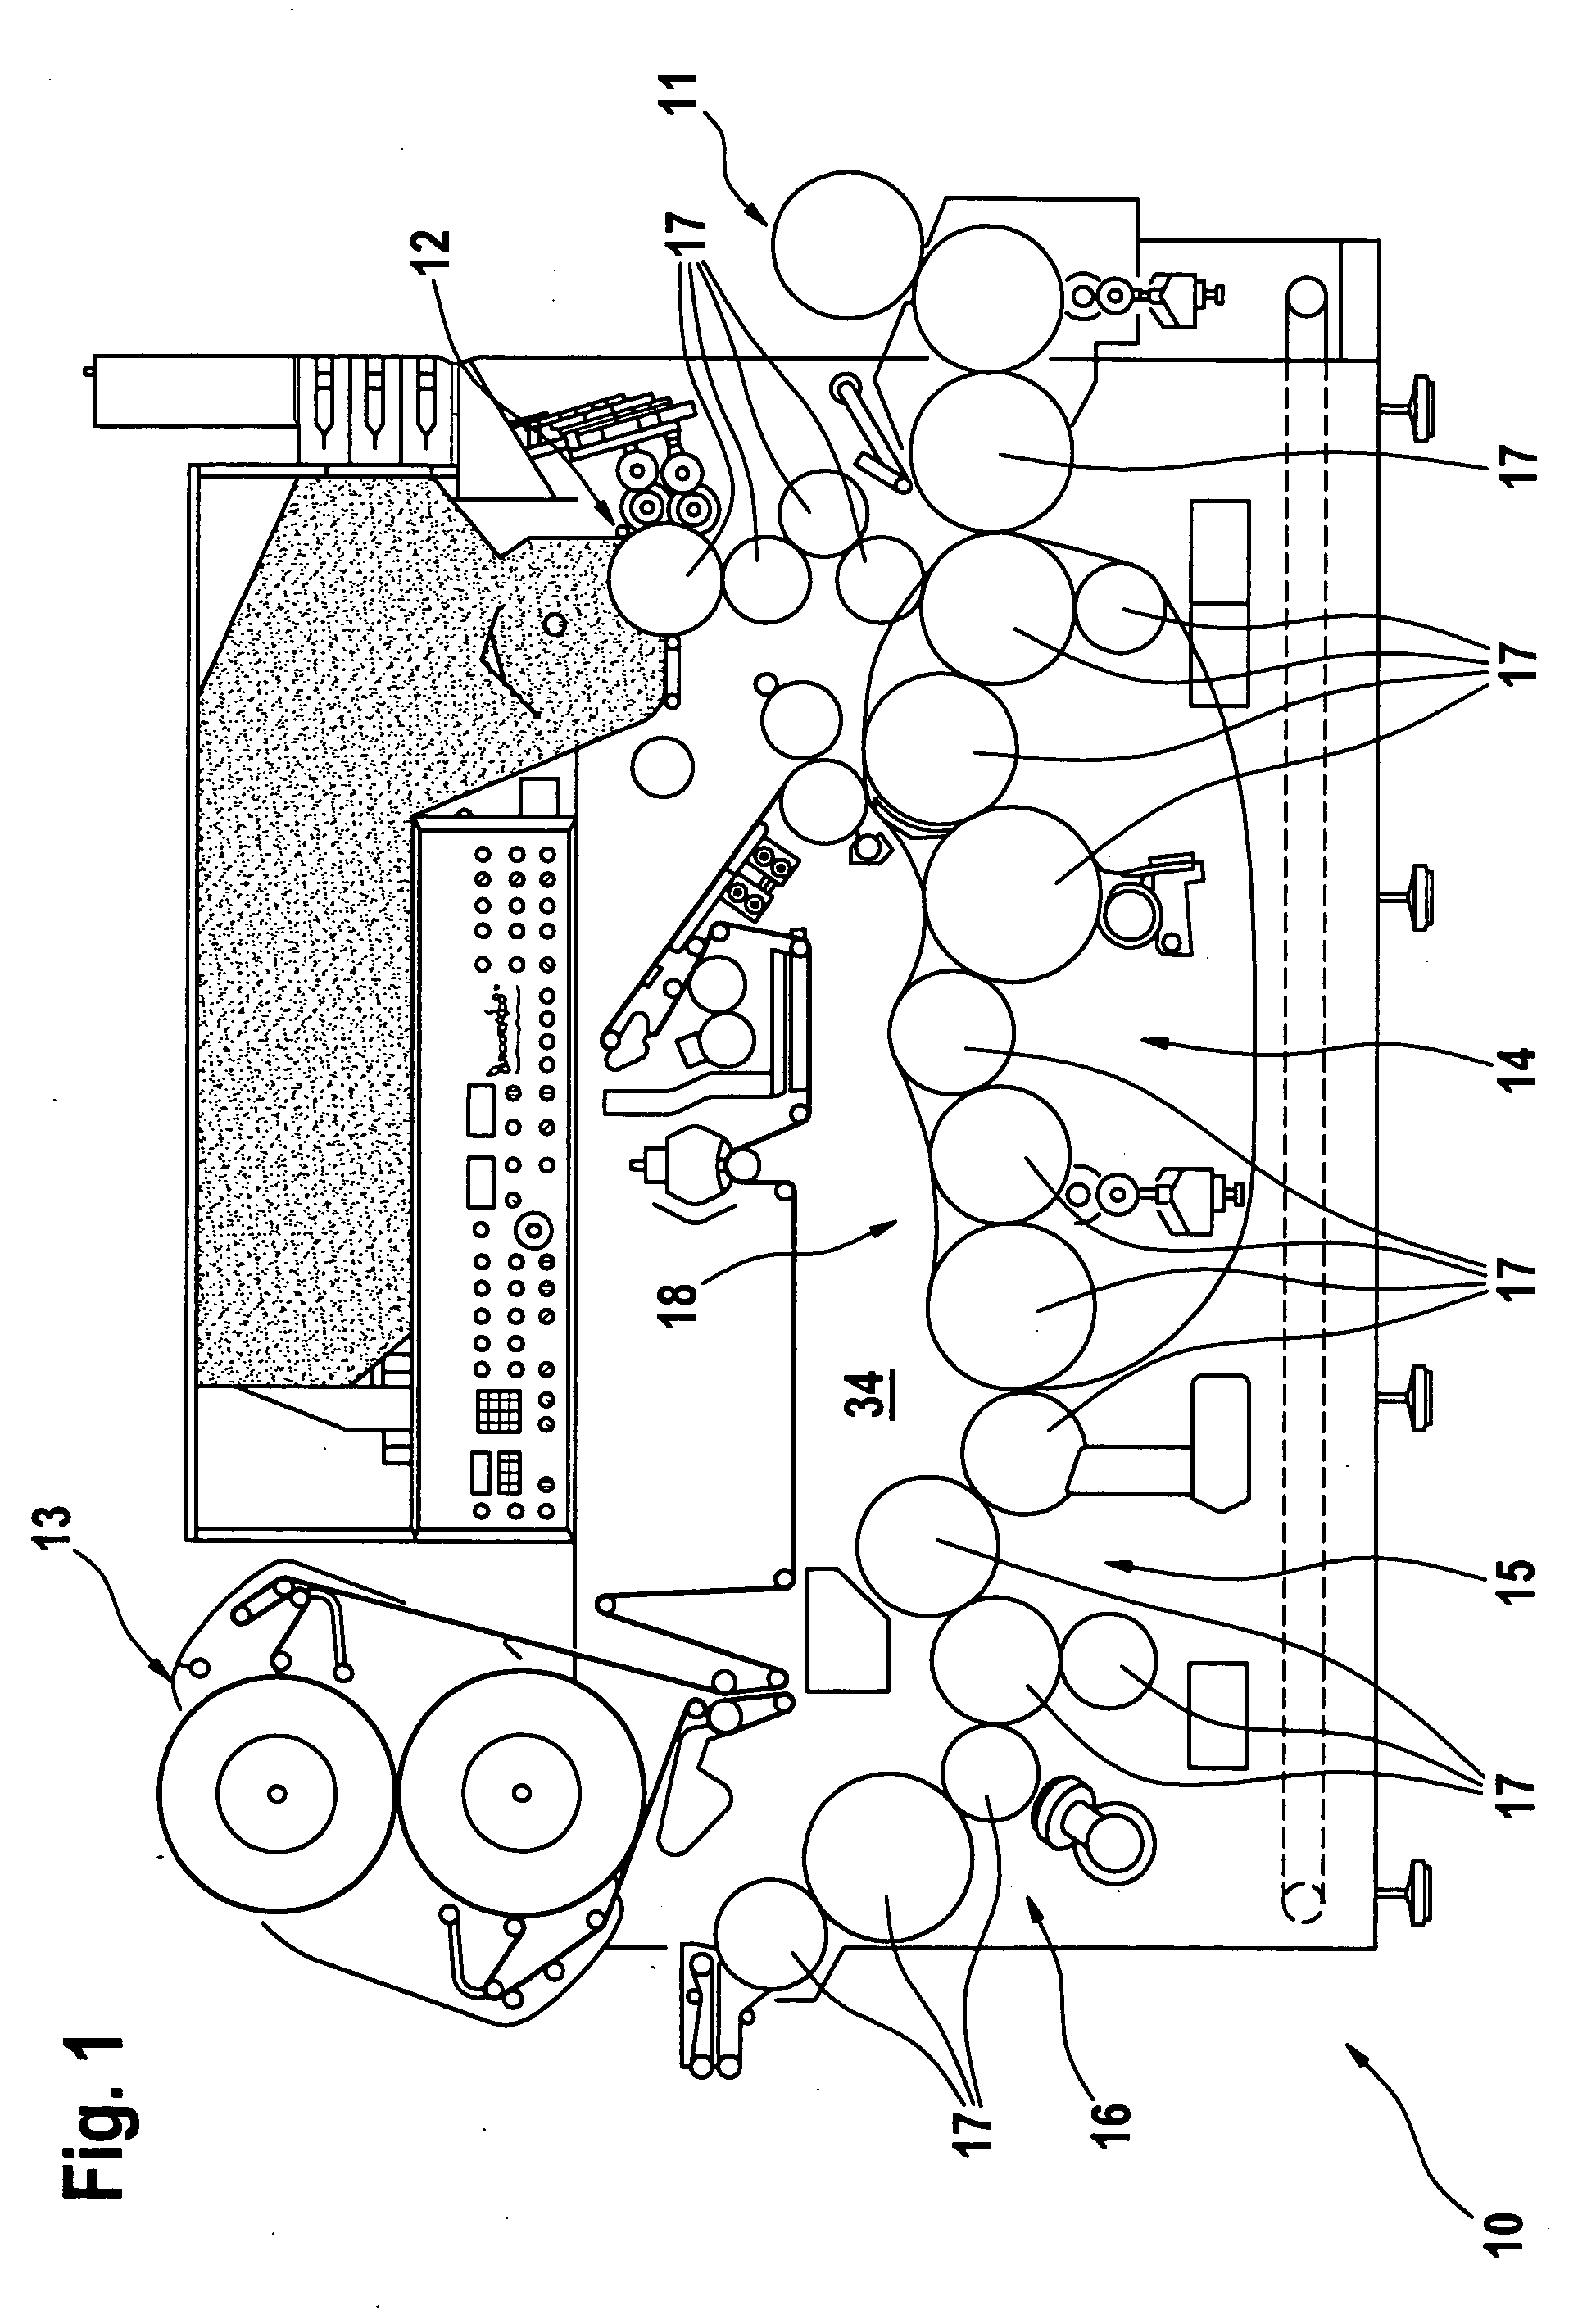 Apparatus for manufacturing rod-shaped tobacco products with a filter, in particular filter cigarettes